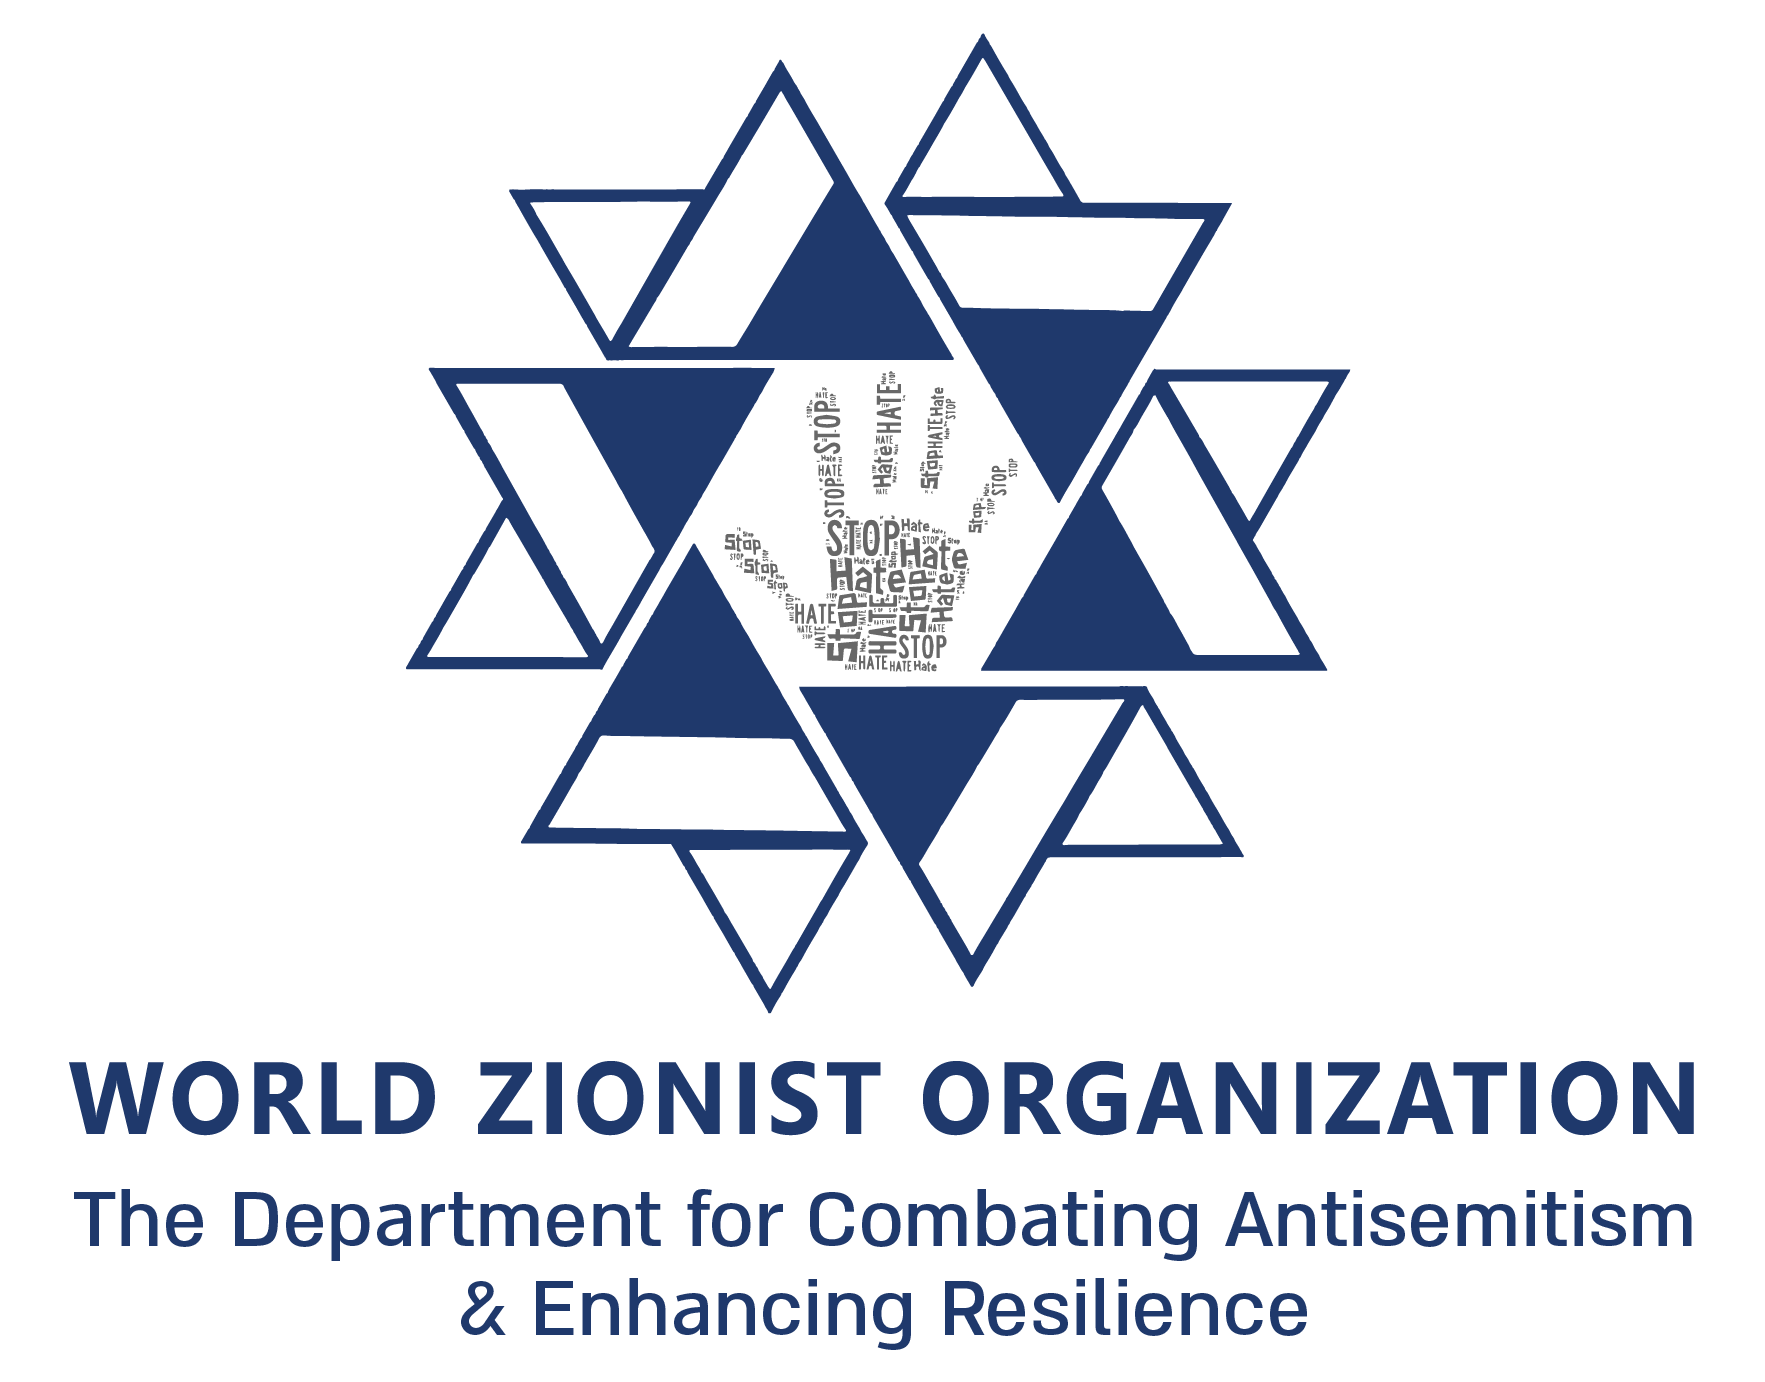 WORLD ZIONIST ORGANIZATION The Department for Combating Antisemitism & Enhancing Resilience